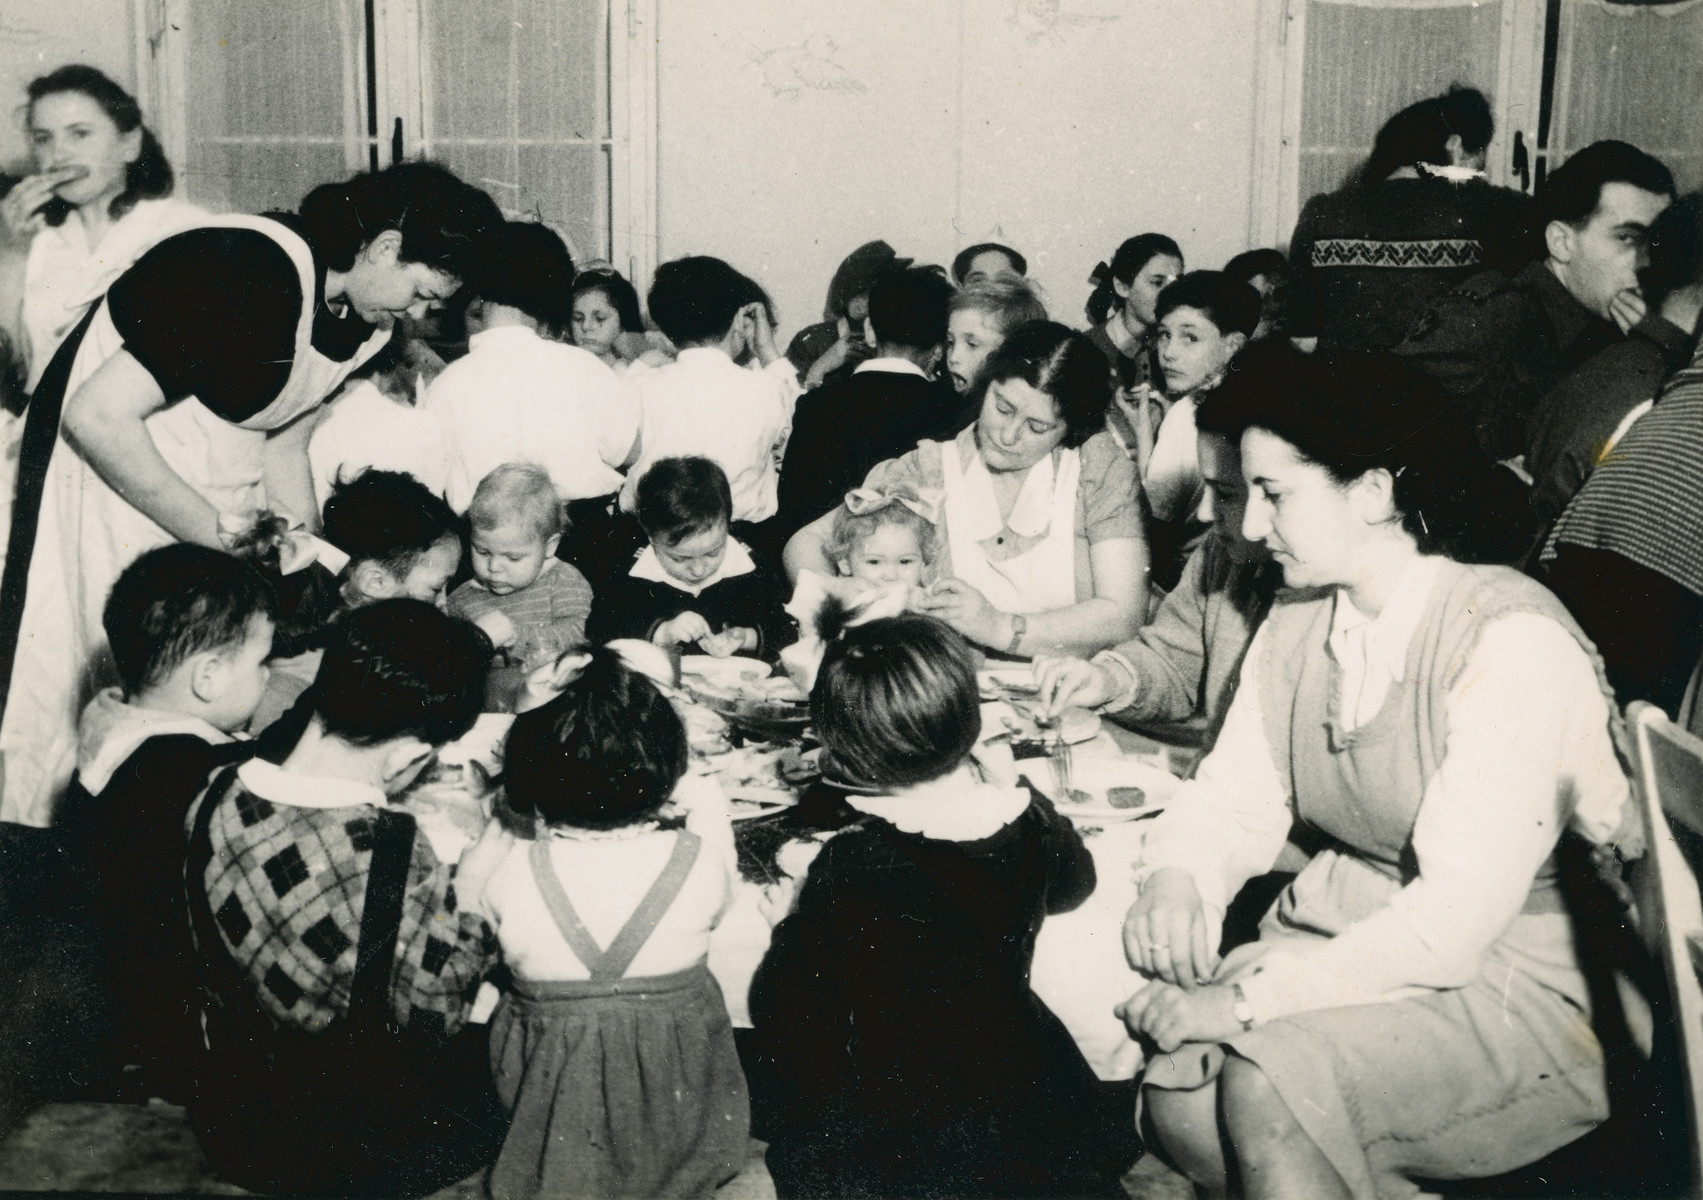 Female aid workers feed young children in the Bergen Belsen displaced persons camp.

Pictured are Elana Millman (the blond baby in the center wearing a sweater) and Zippy Orlin, the aid worker sitting in front.